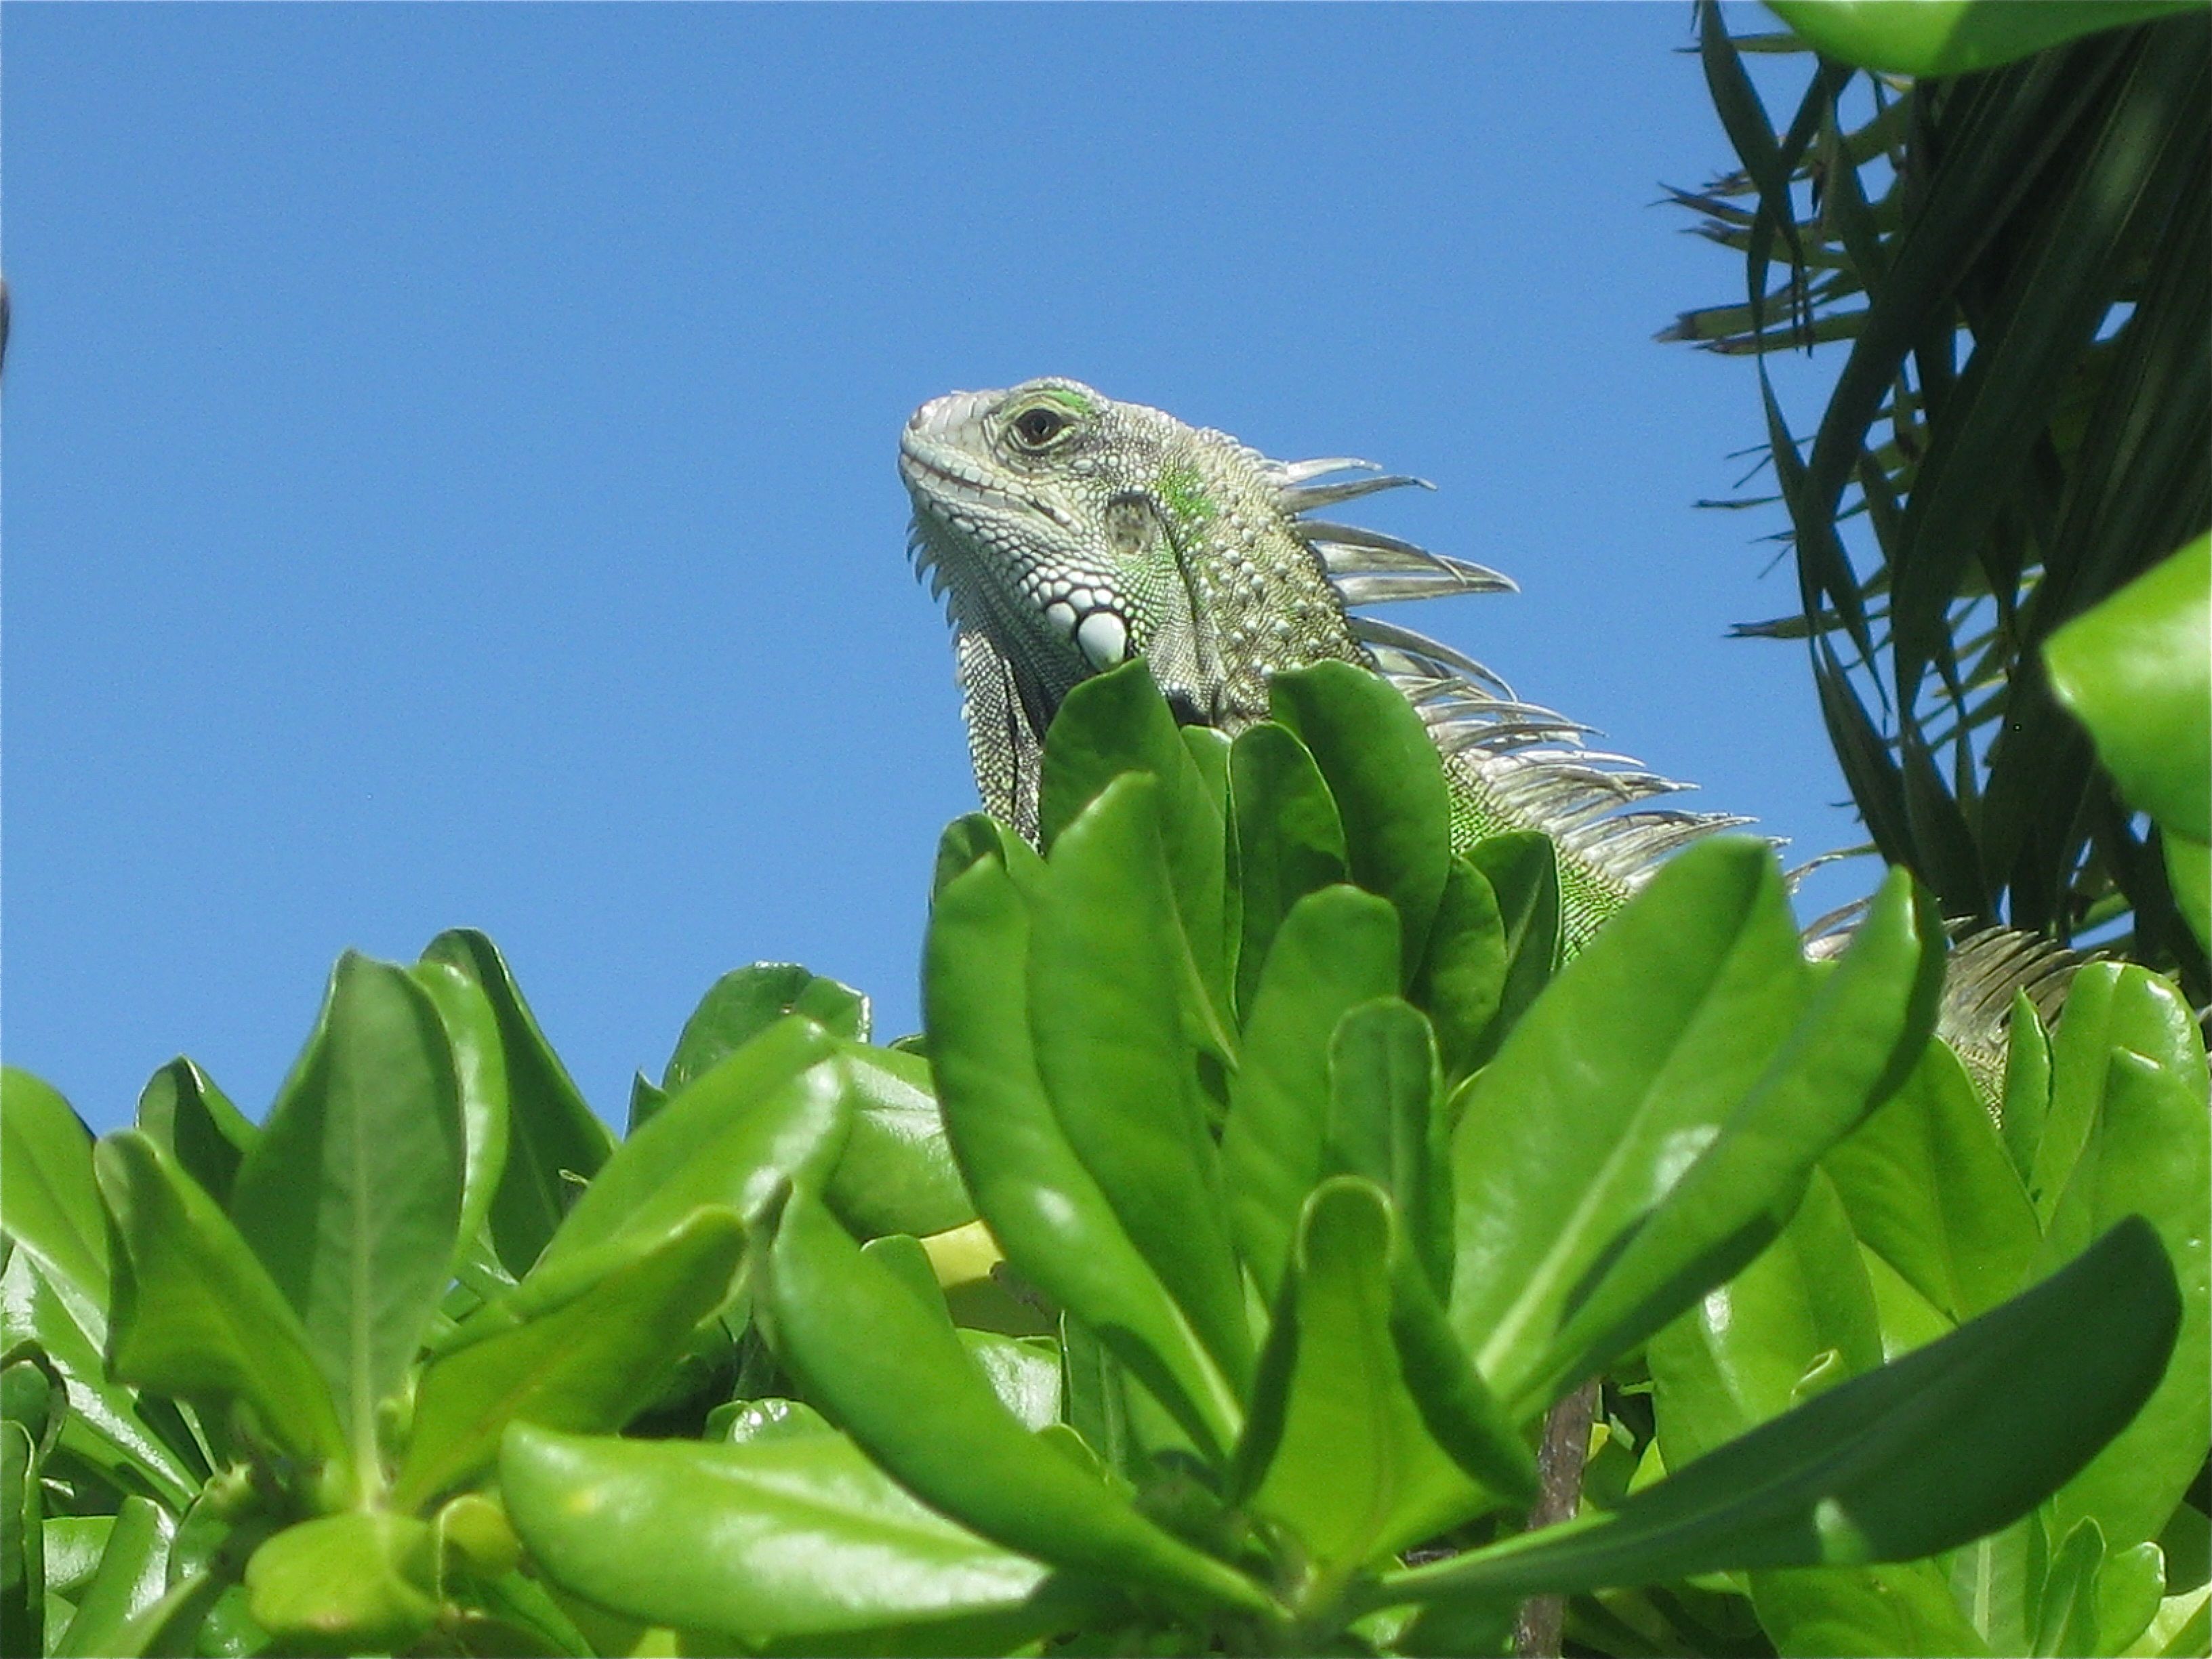 Close-up... a Wild Iguana - we were sitting by the pool at a hotel ...